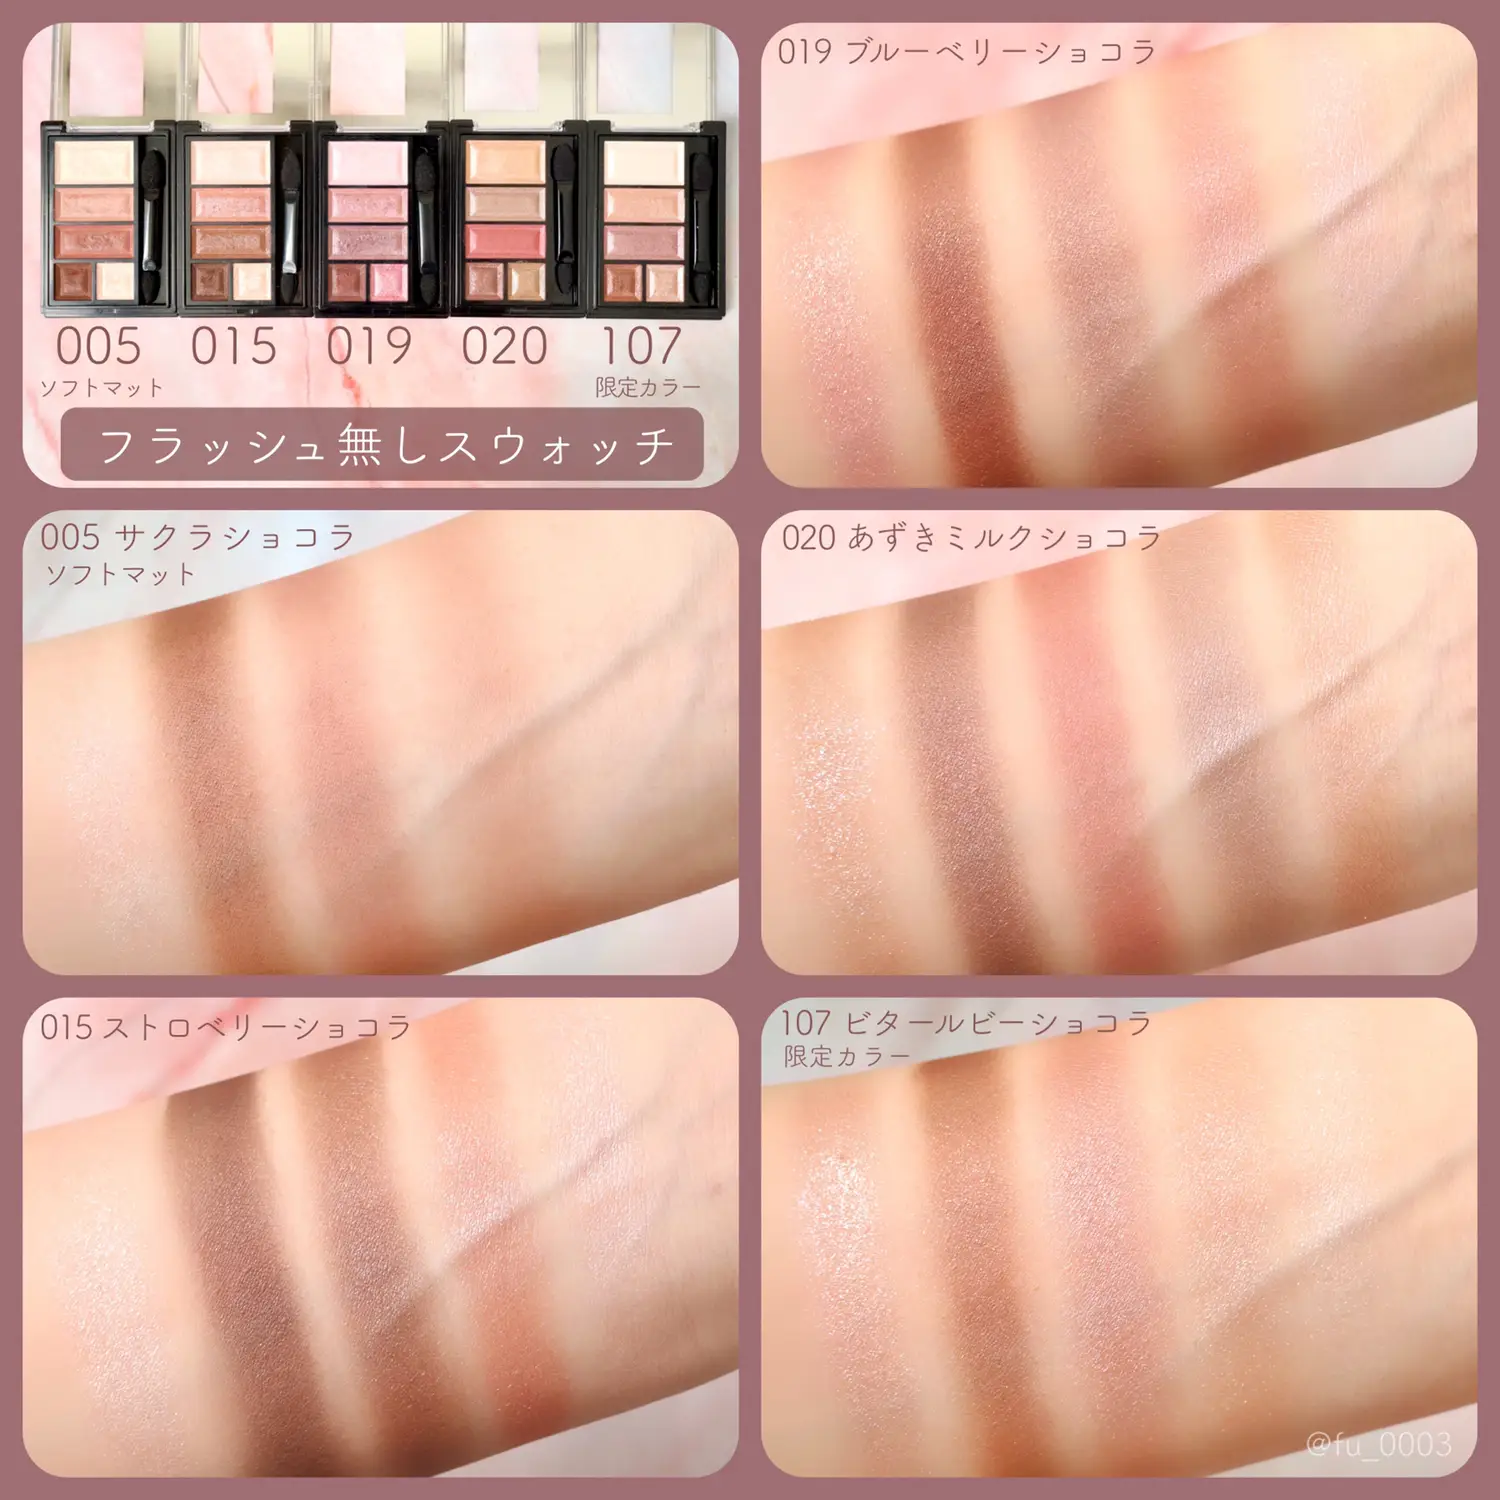 Rimmel] I compared the 5 colors I have ♡ | Gallery posted by 